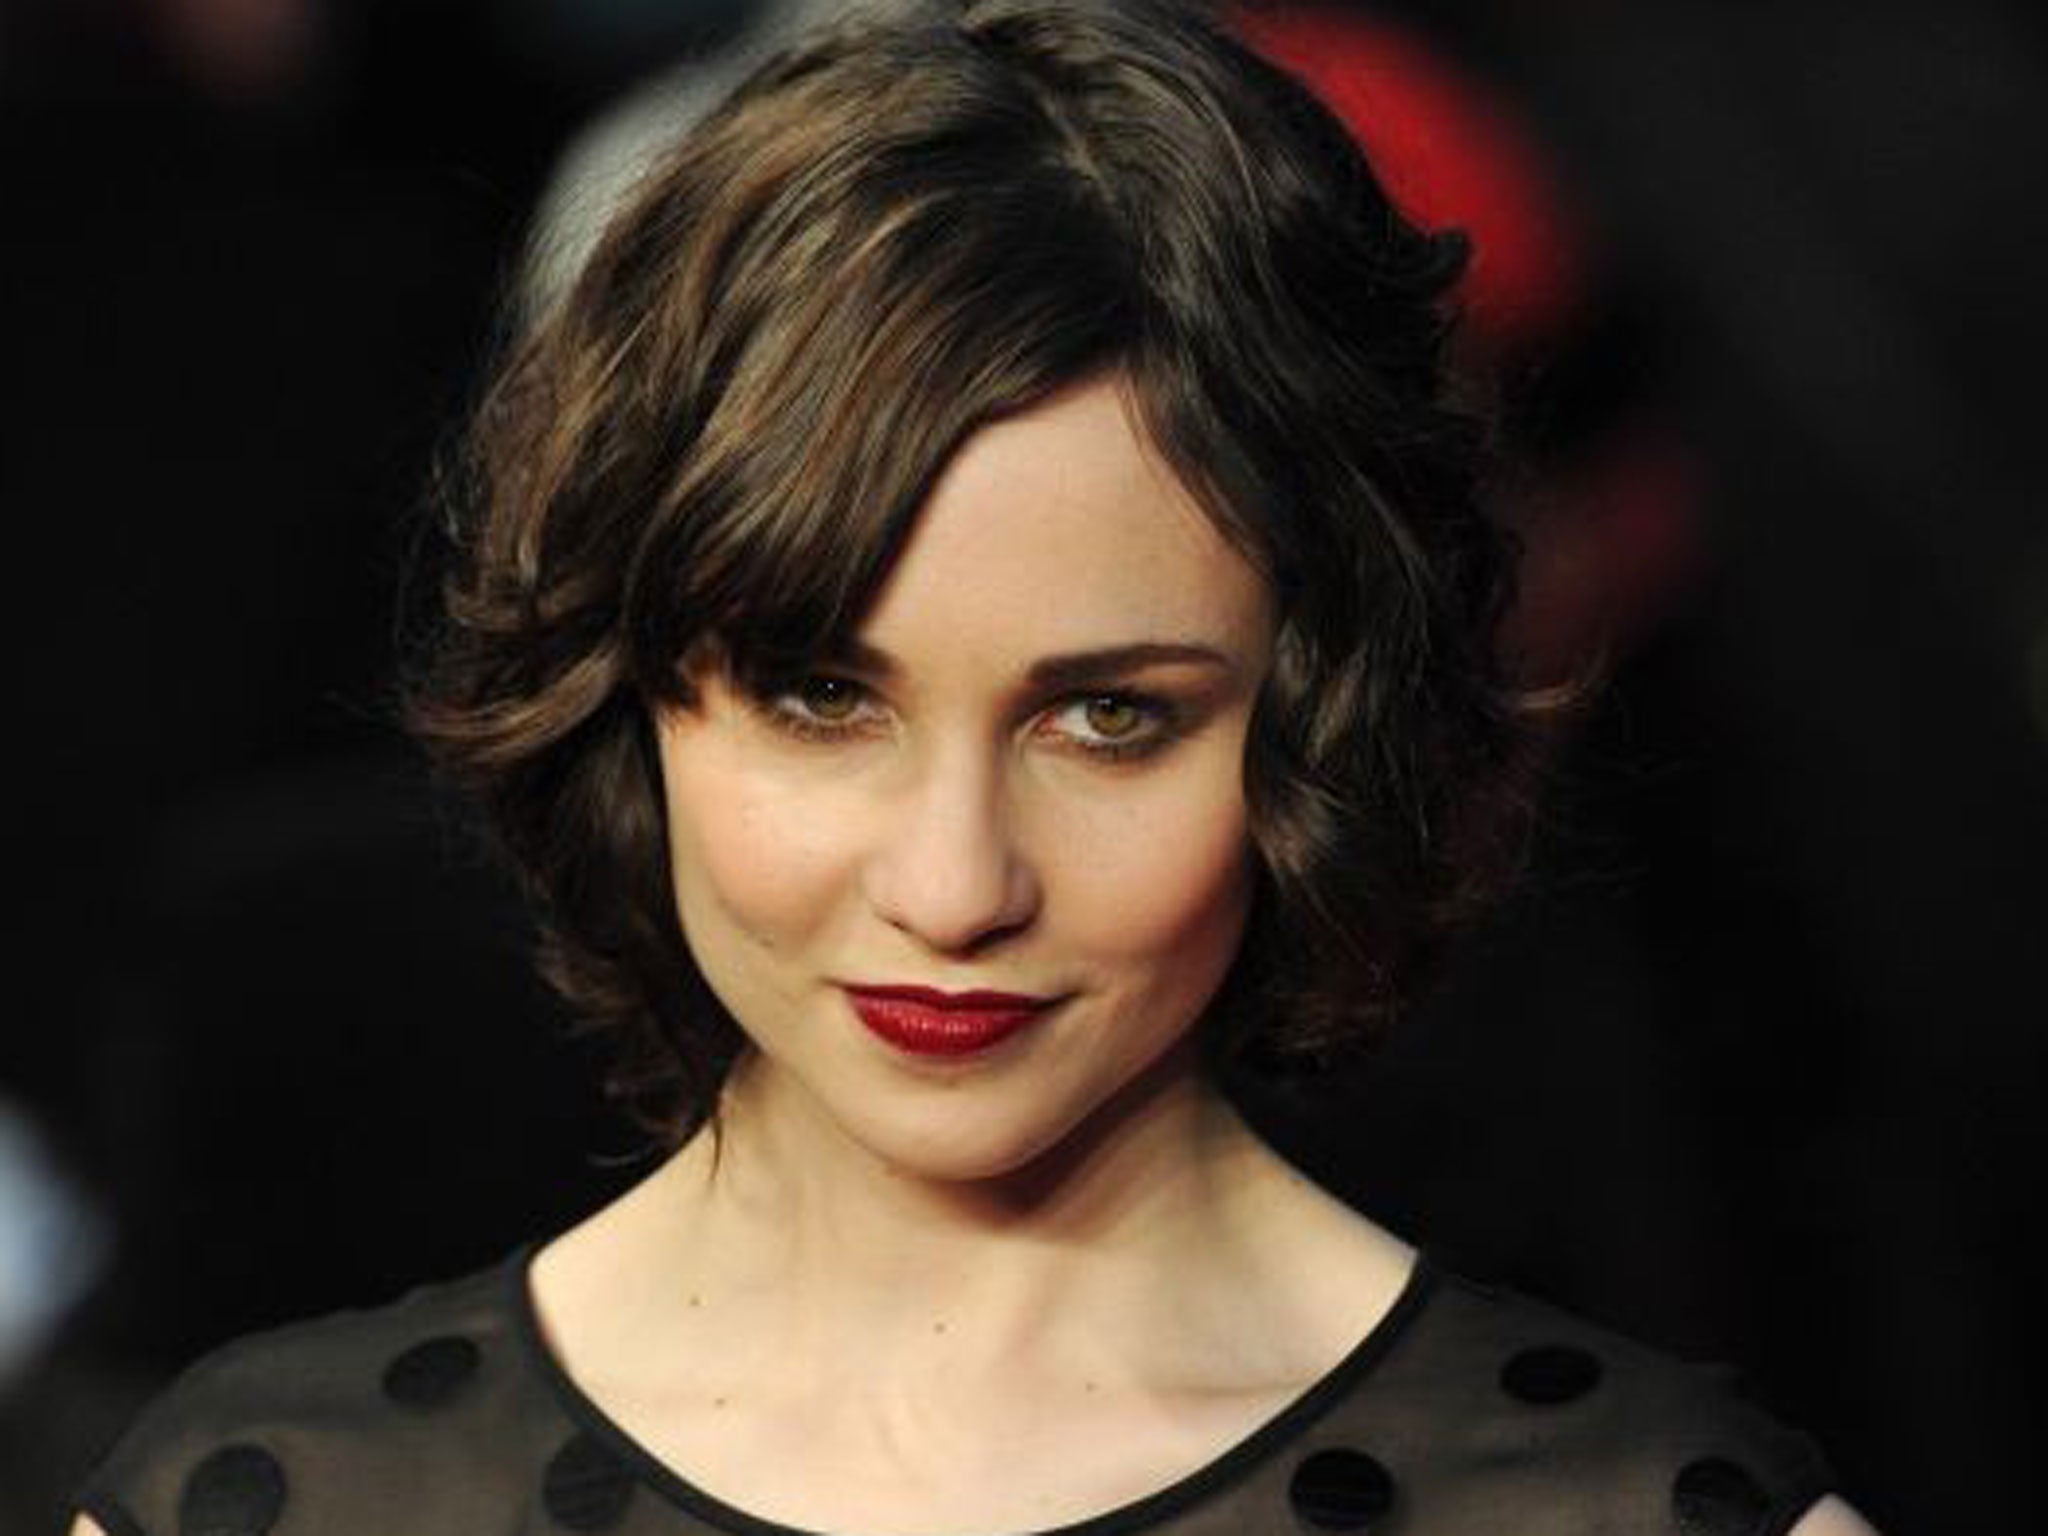 Proving her worth to Hollywood: Tuppence Middleton